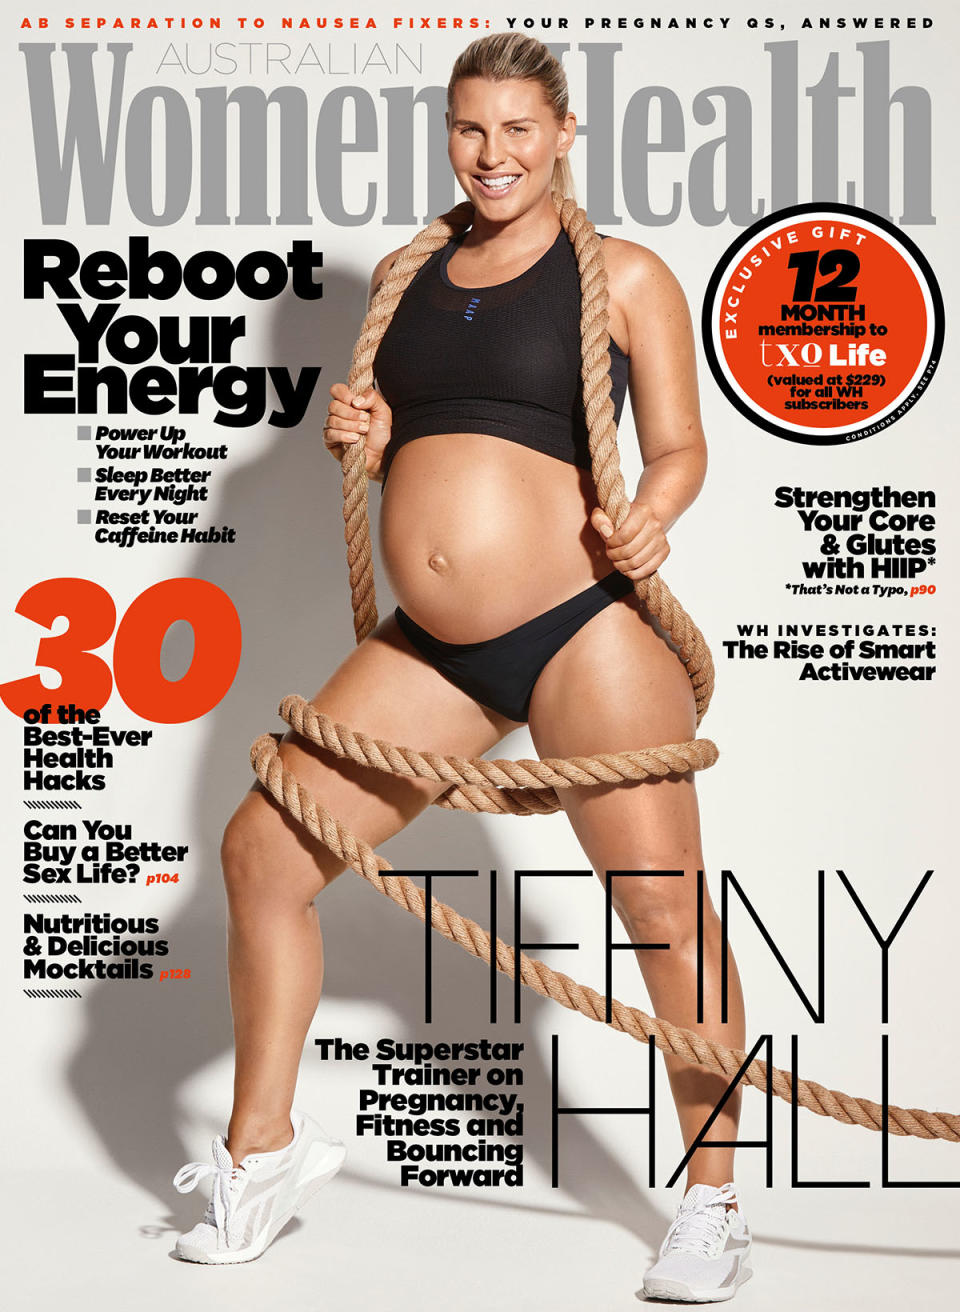 Tiffiny Hall on the cover of Women's Health, wearing a black workout bra and underwear, holding a rope. She is heavily pregnant.